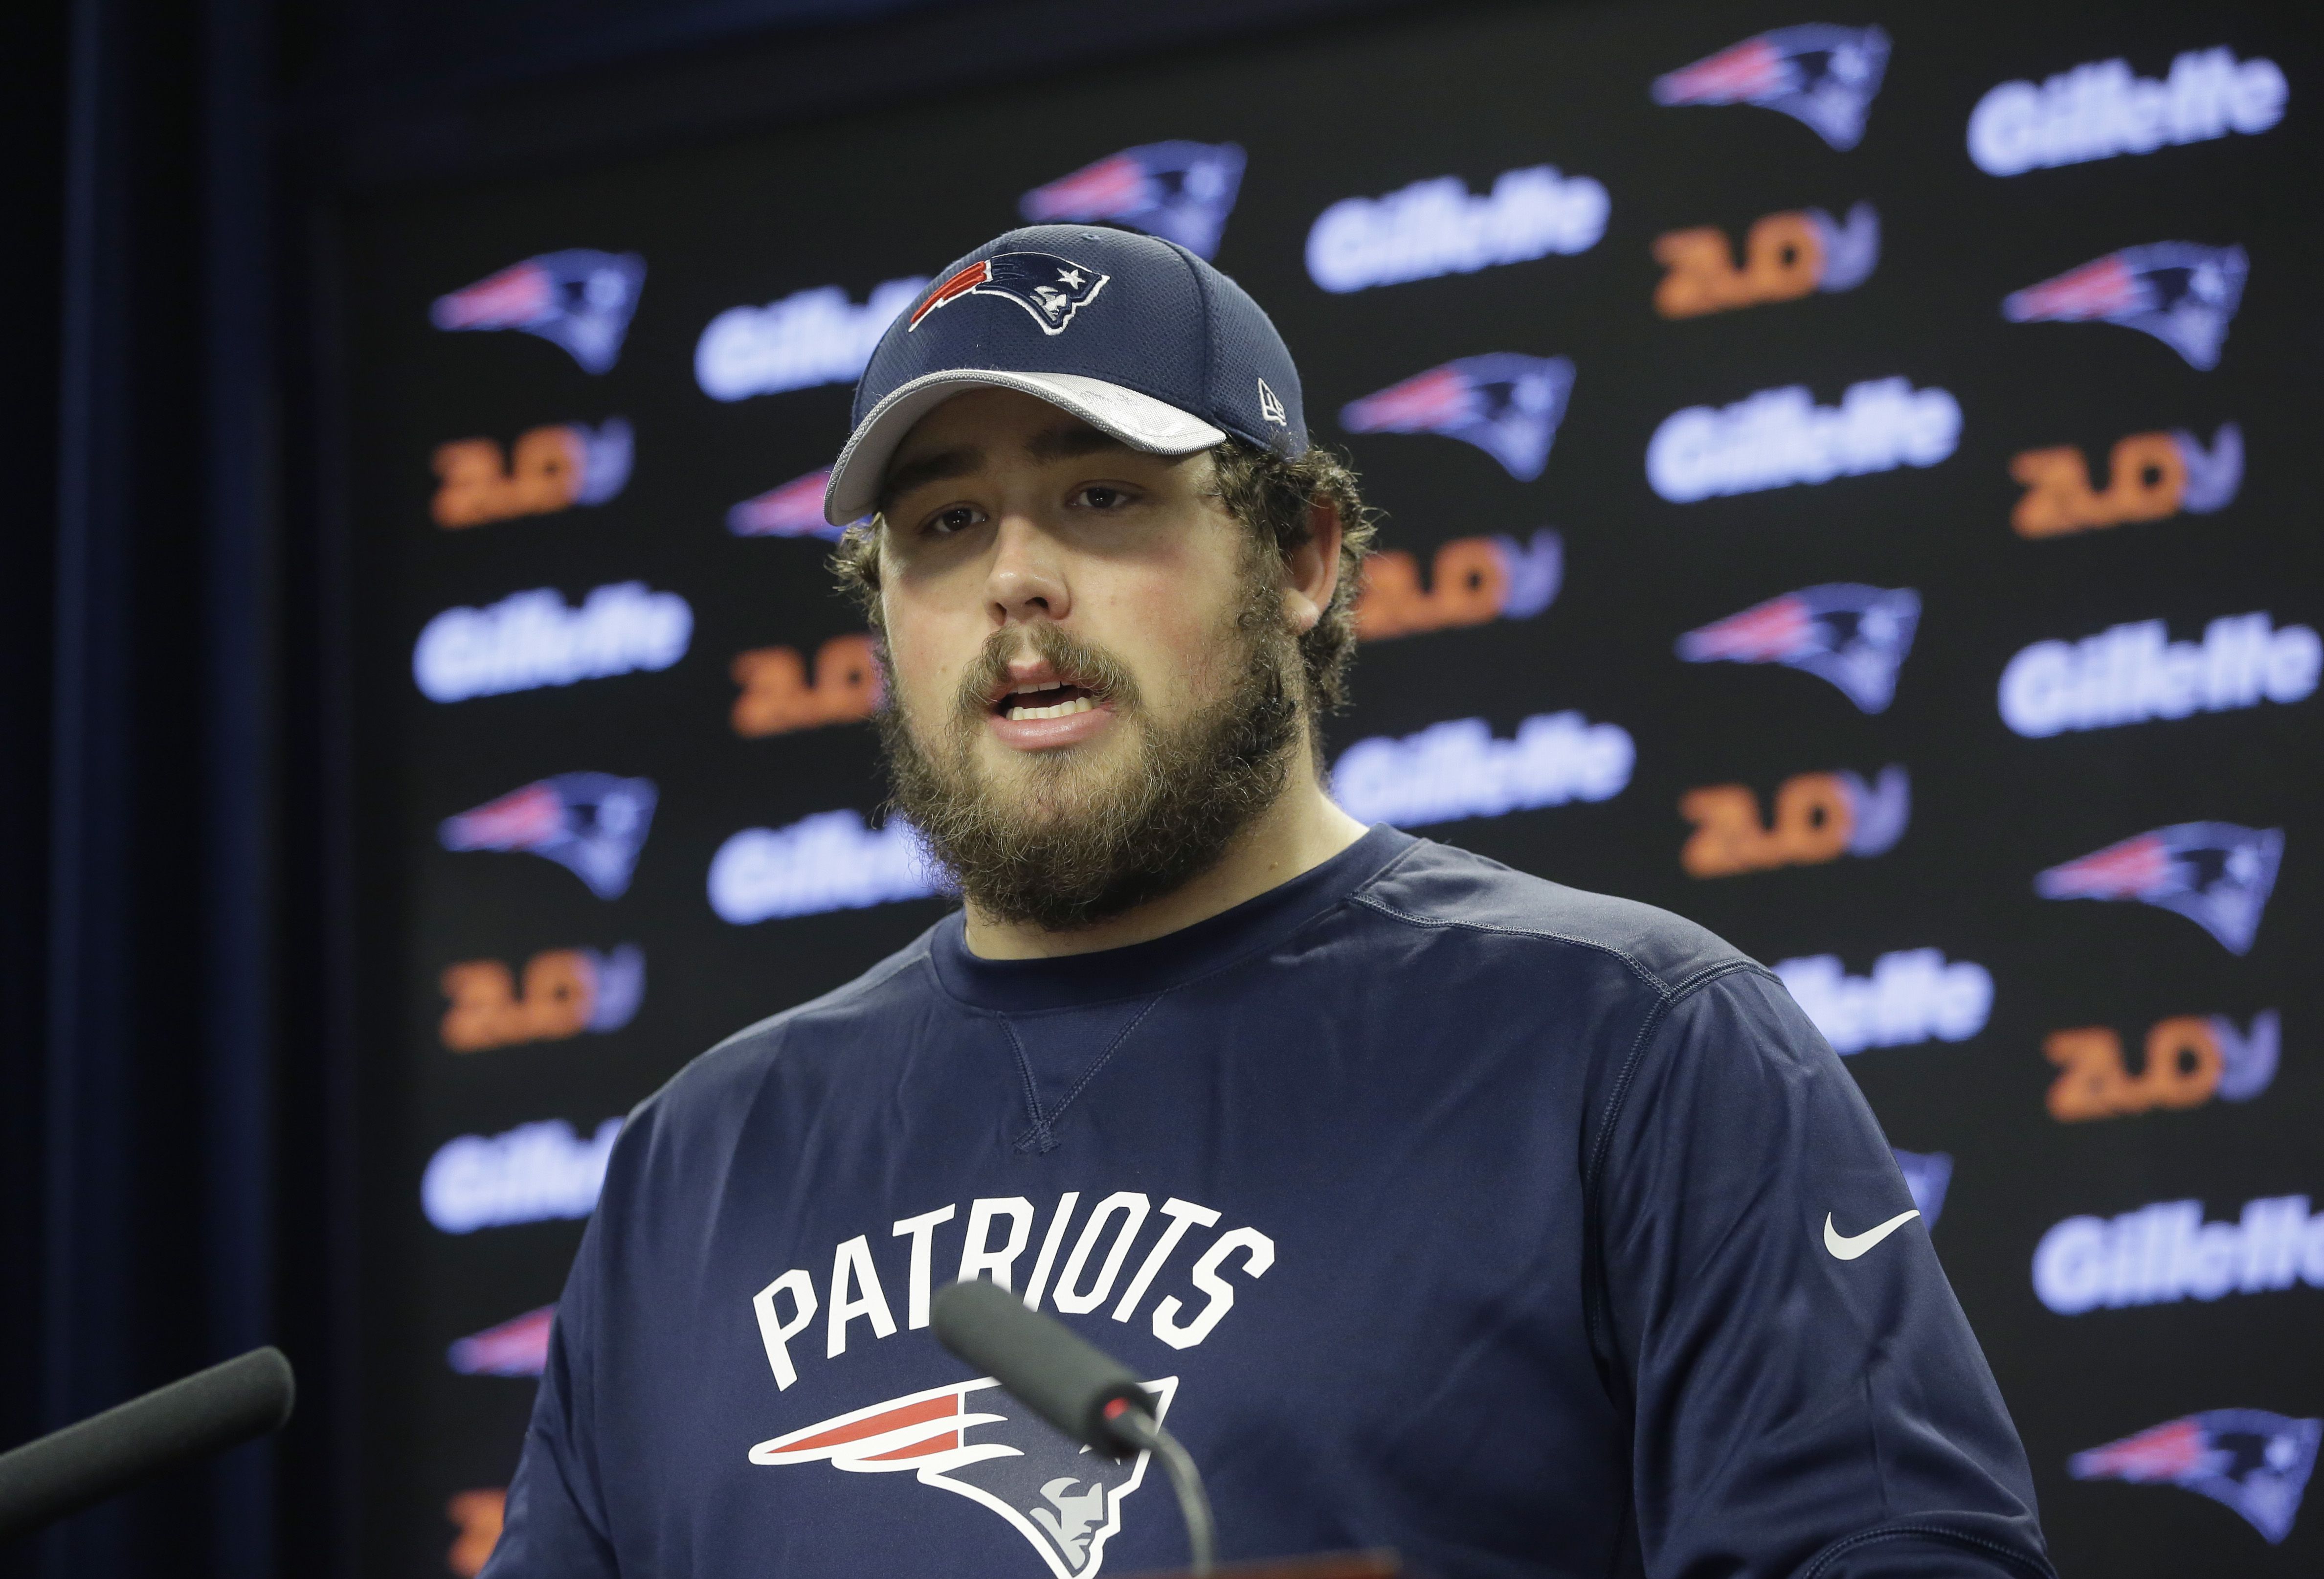 David Andrews remarkably back at Patriots practice, new player